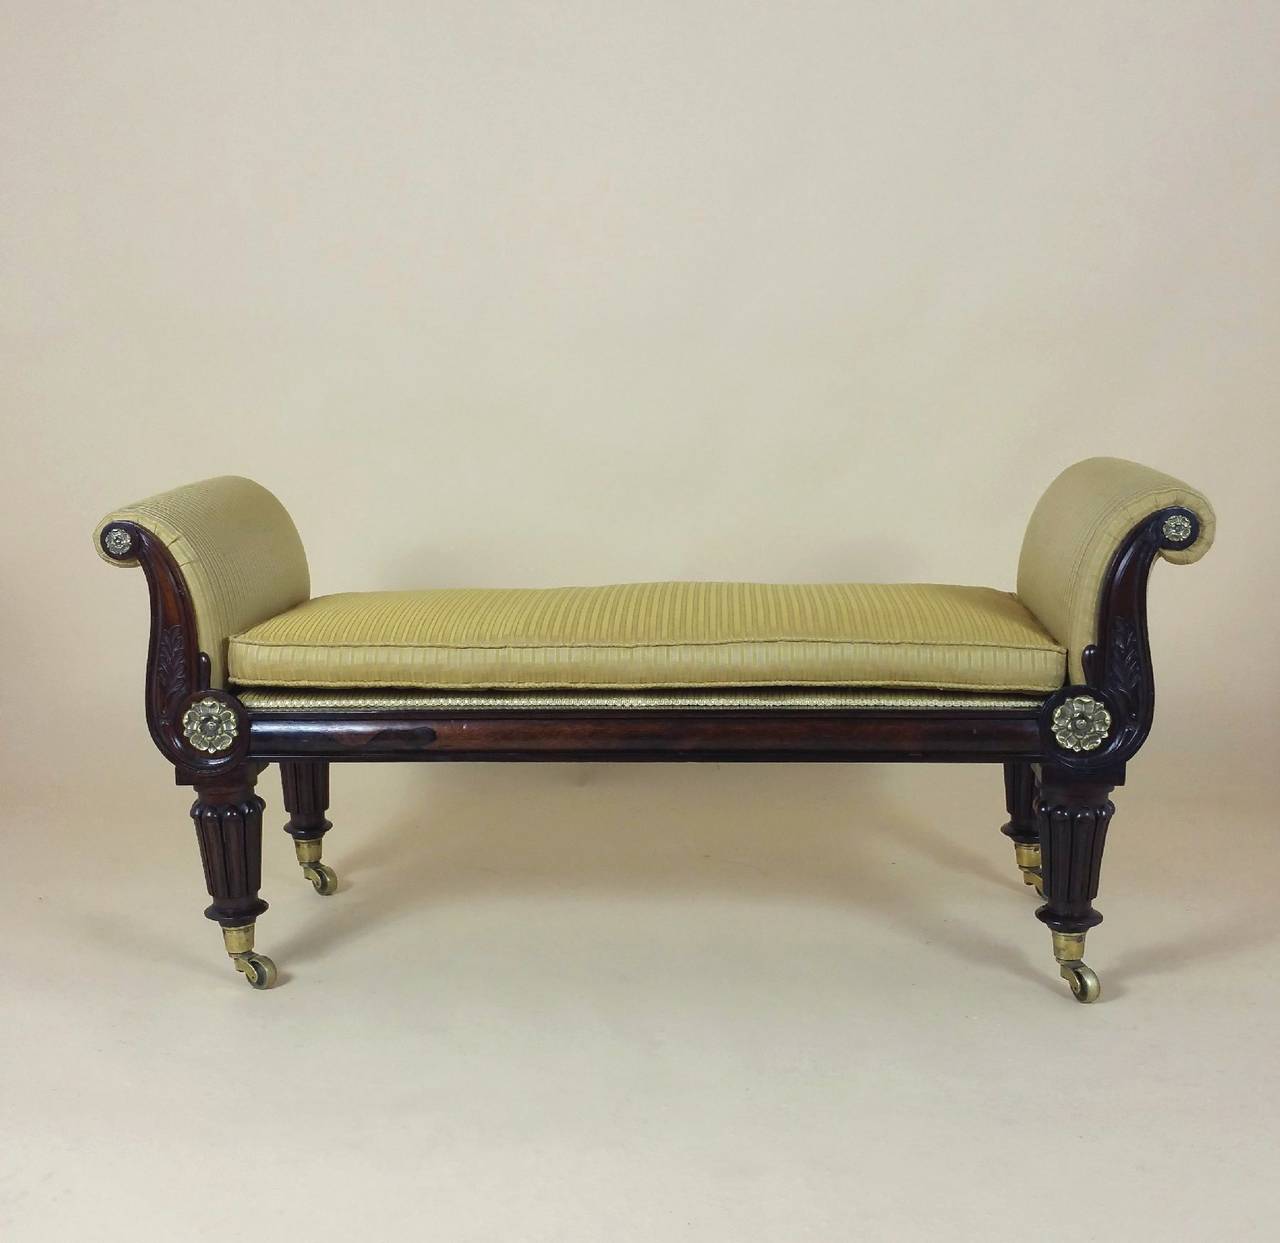 Great Britain (UK) Early 19th Century Rosewood Window Seat with Brass Mounts and Carved Decoration